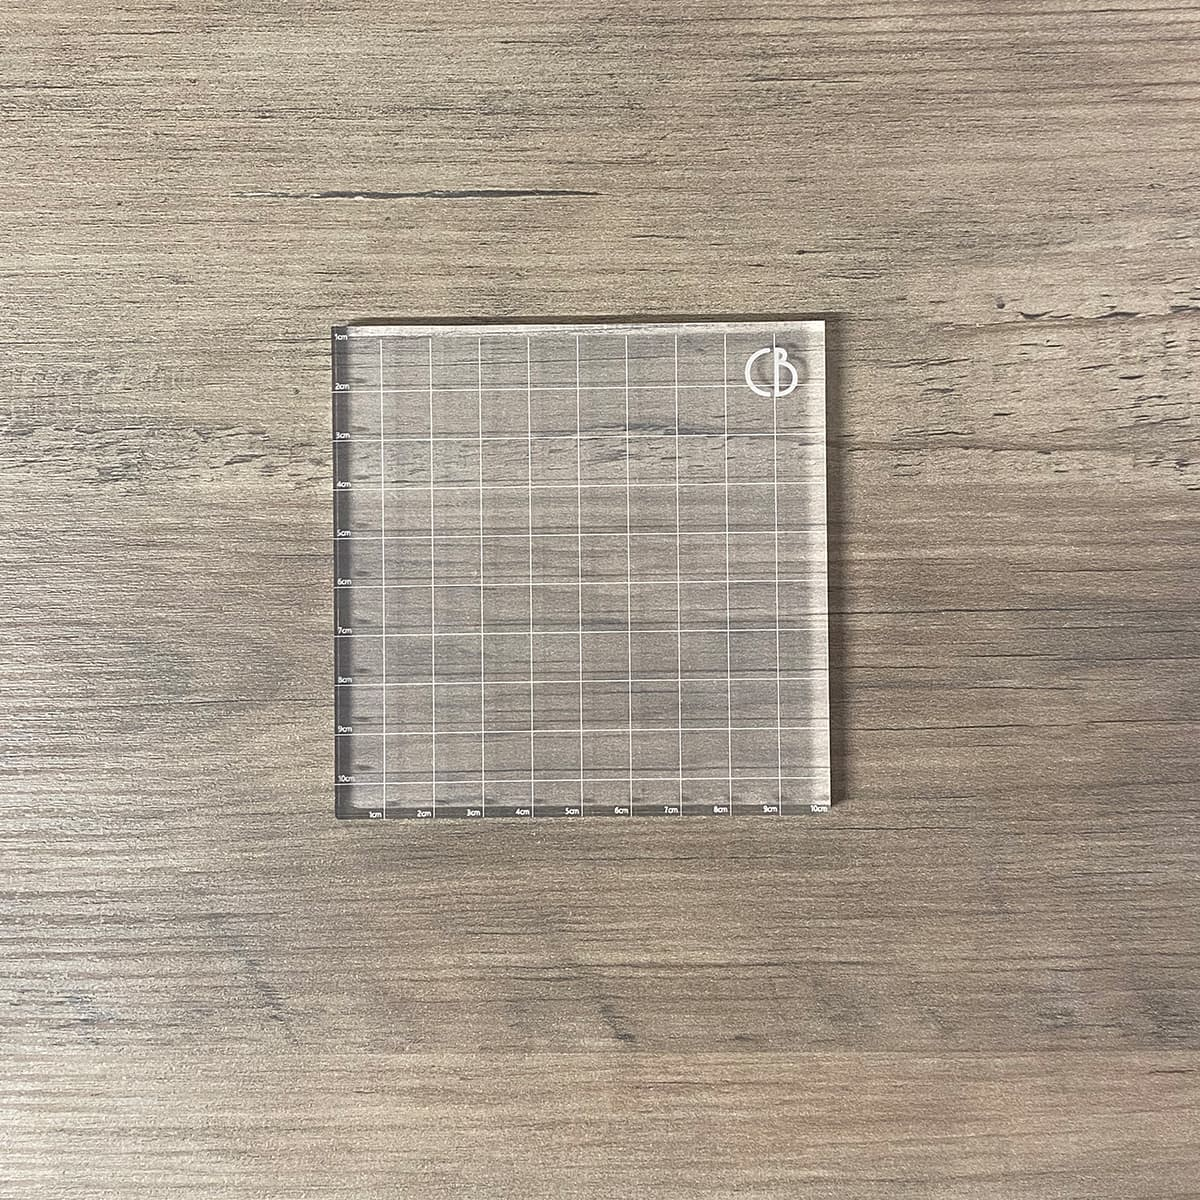 Ciao Bella Acrylic Block 10x10 cm with Grid Lines